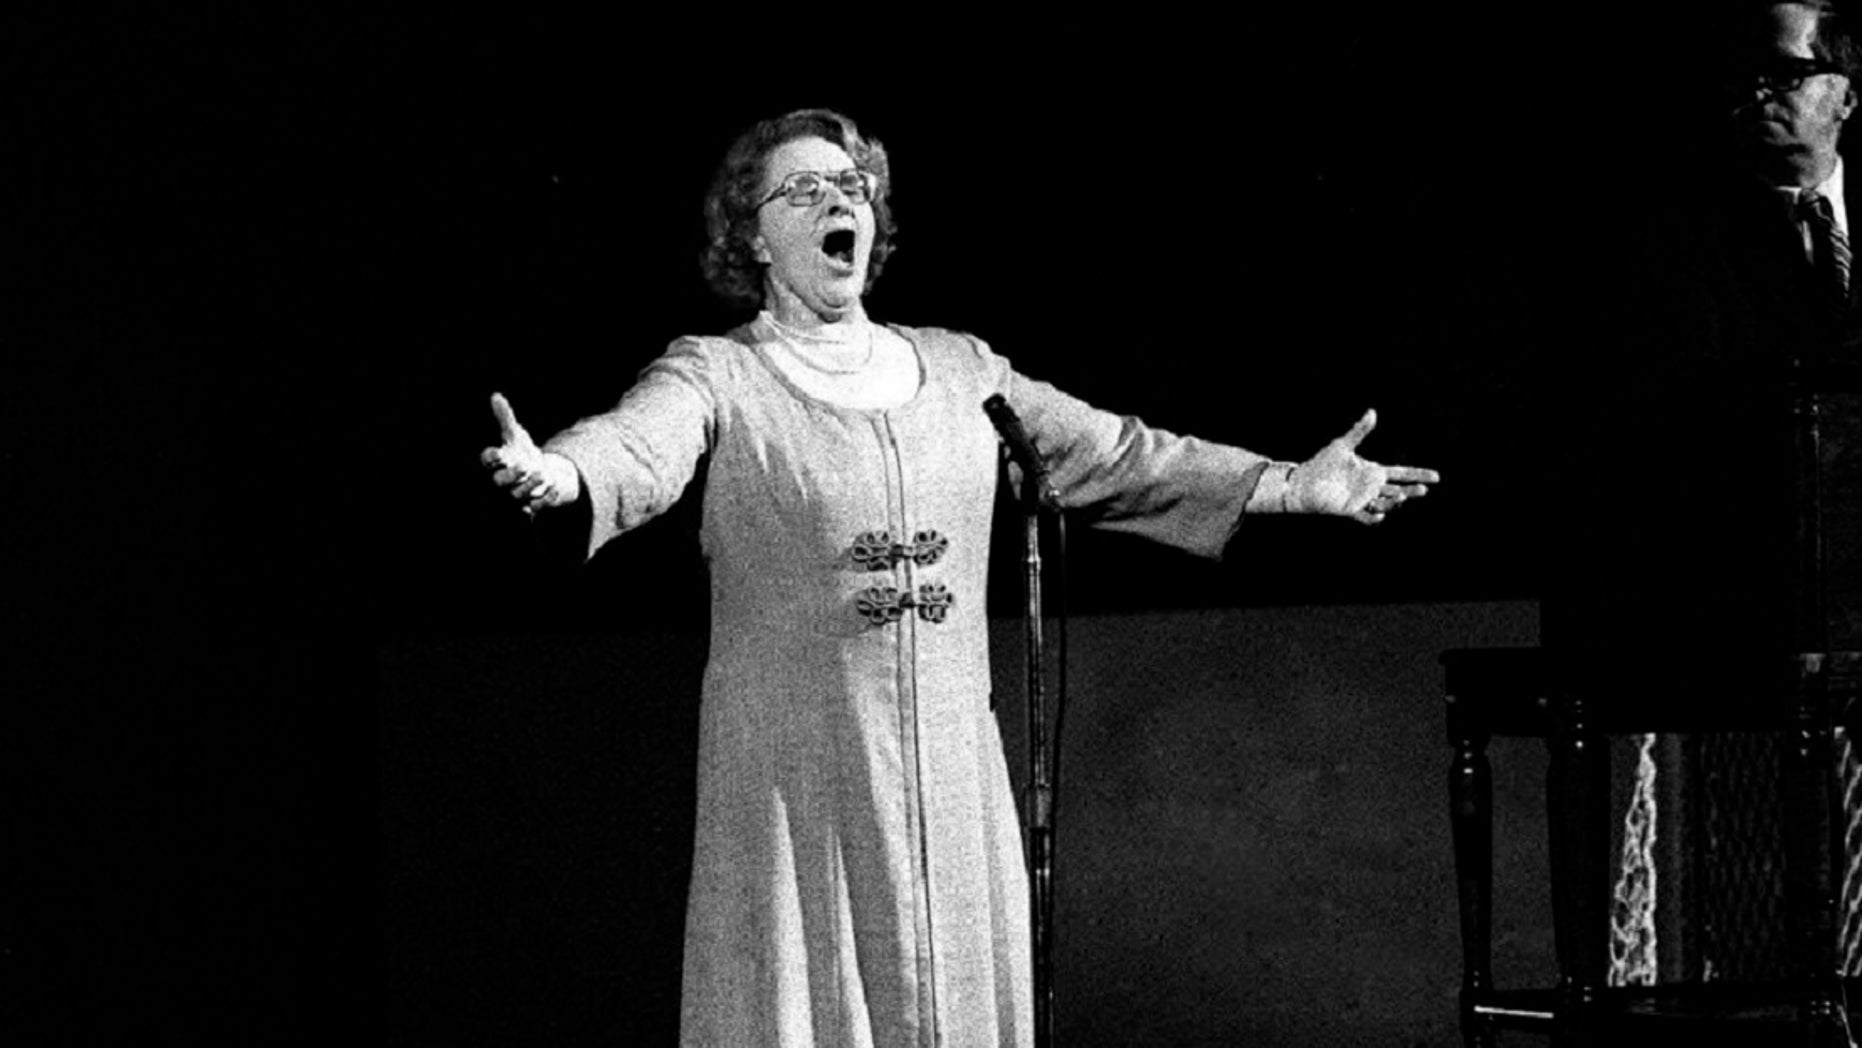 The New York Yankees have suspended the use of Kate Smith's recording 